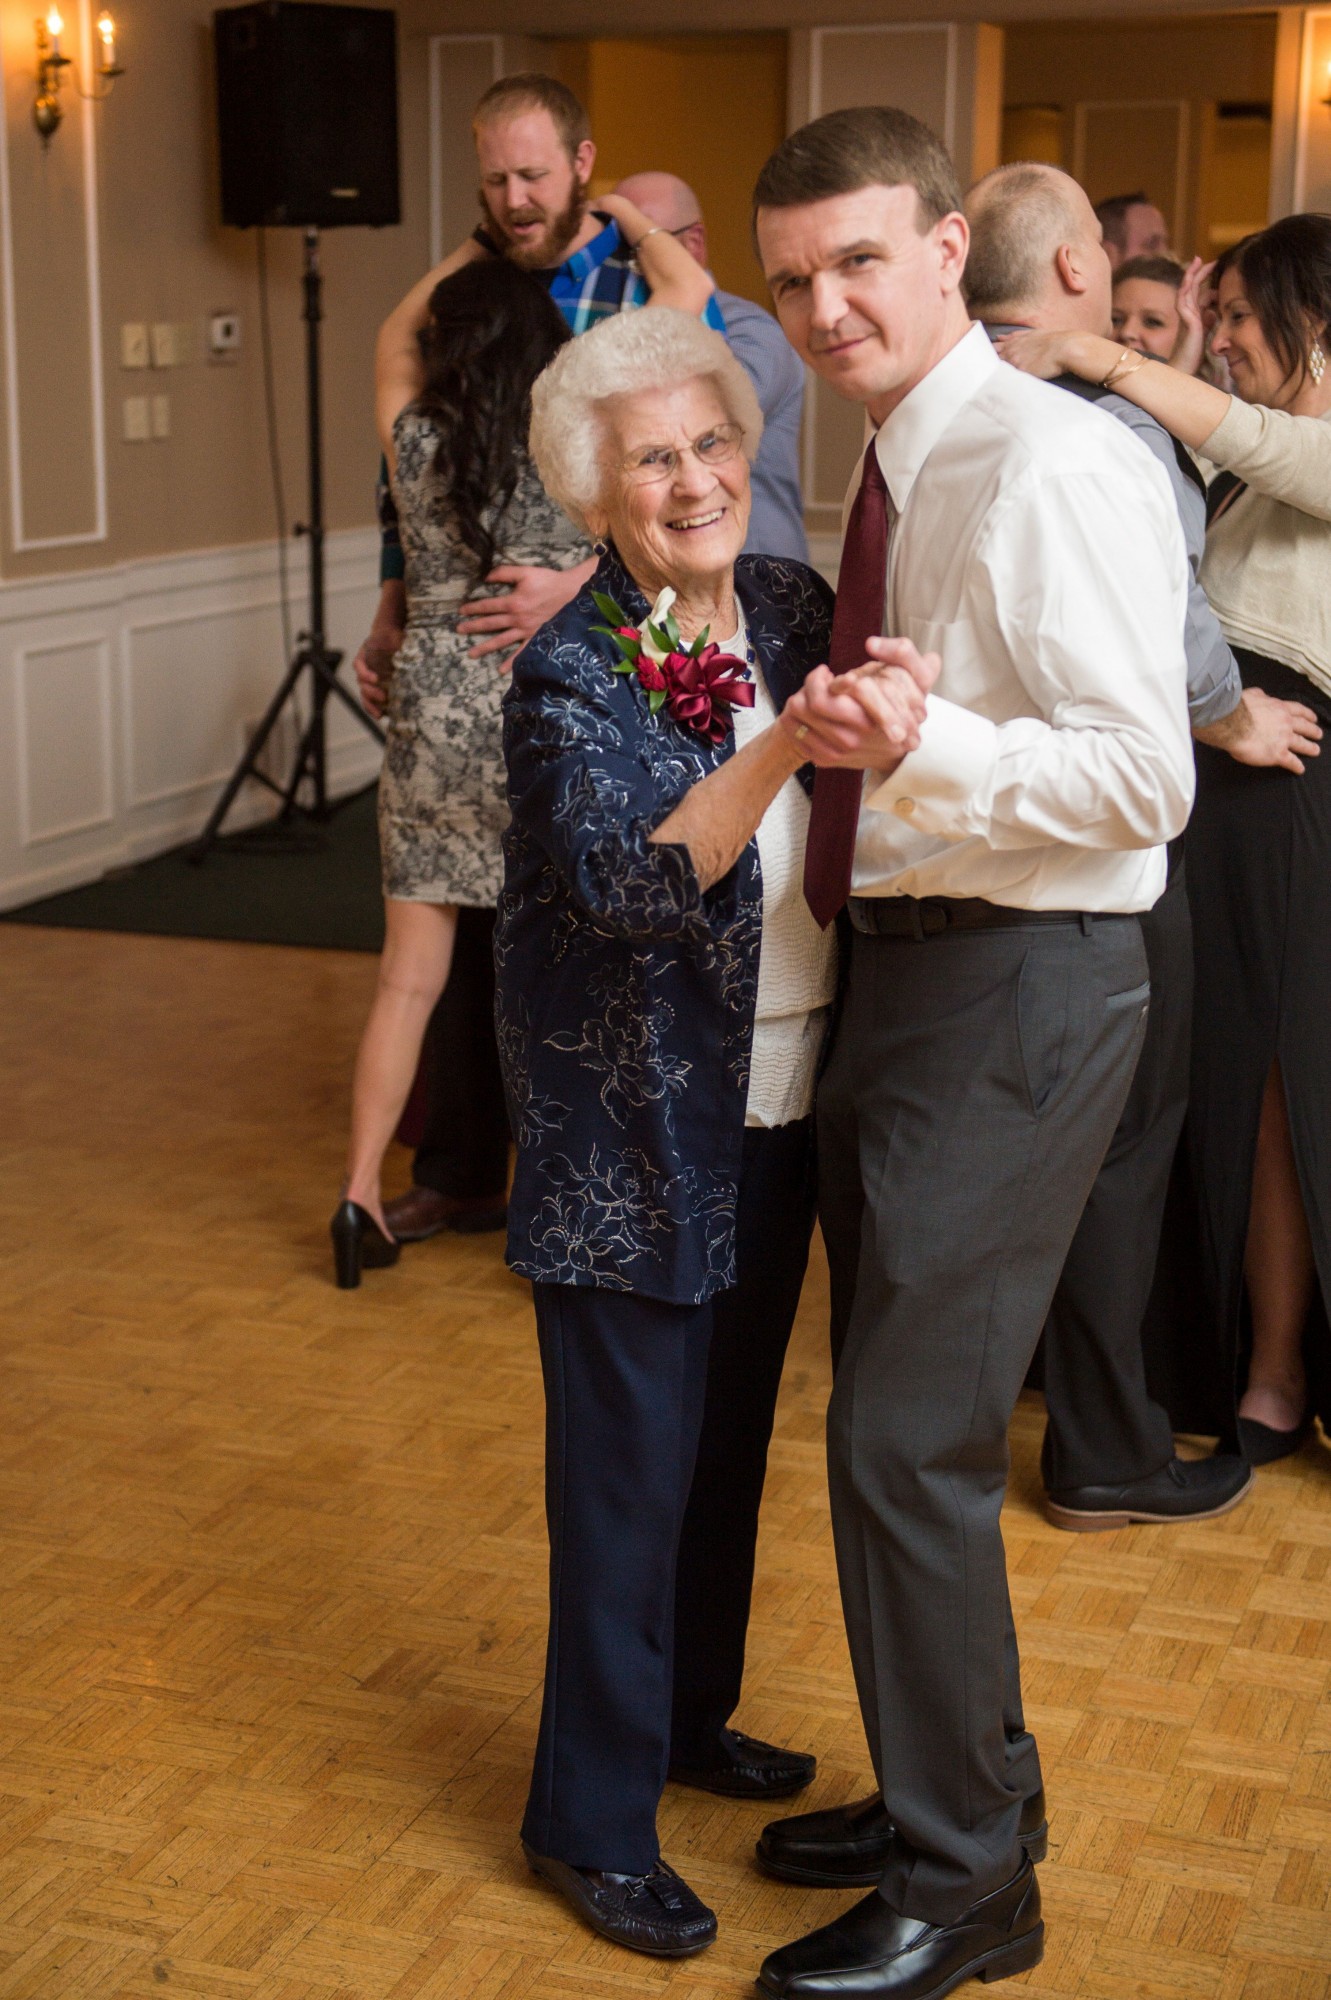 Brad is dancing with his grandmother at his wedding.